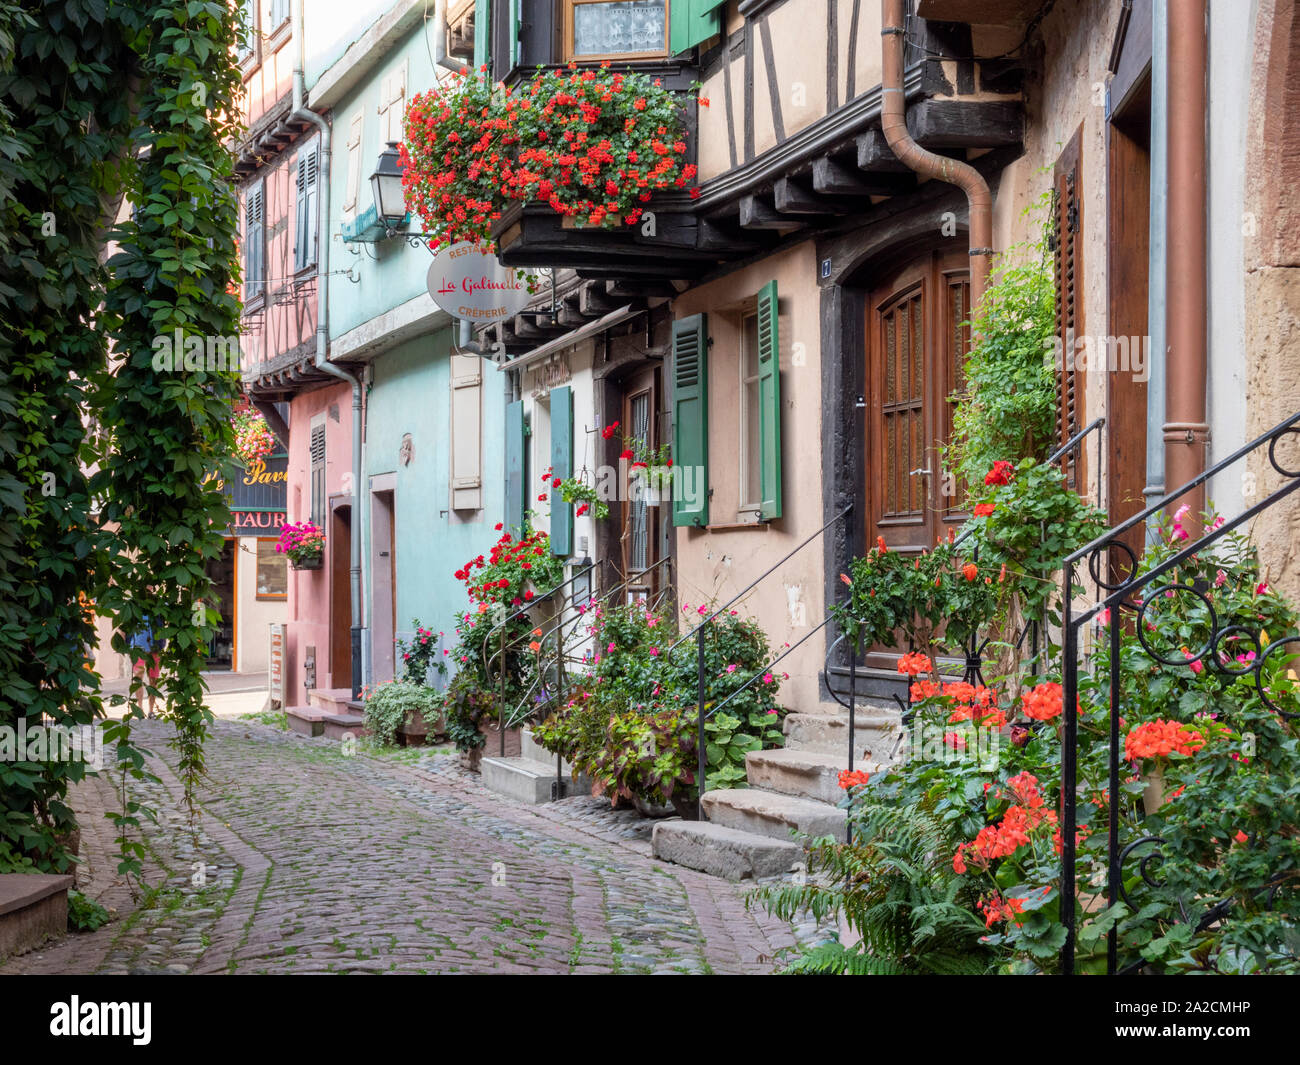 Half timbered buildings in the centre of Eguisheim Alsace France a pretty medieval town in the heart of the Alsace wine region and popular travel dest Stock Photo